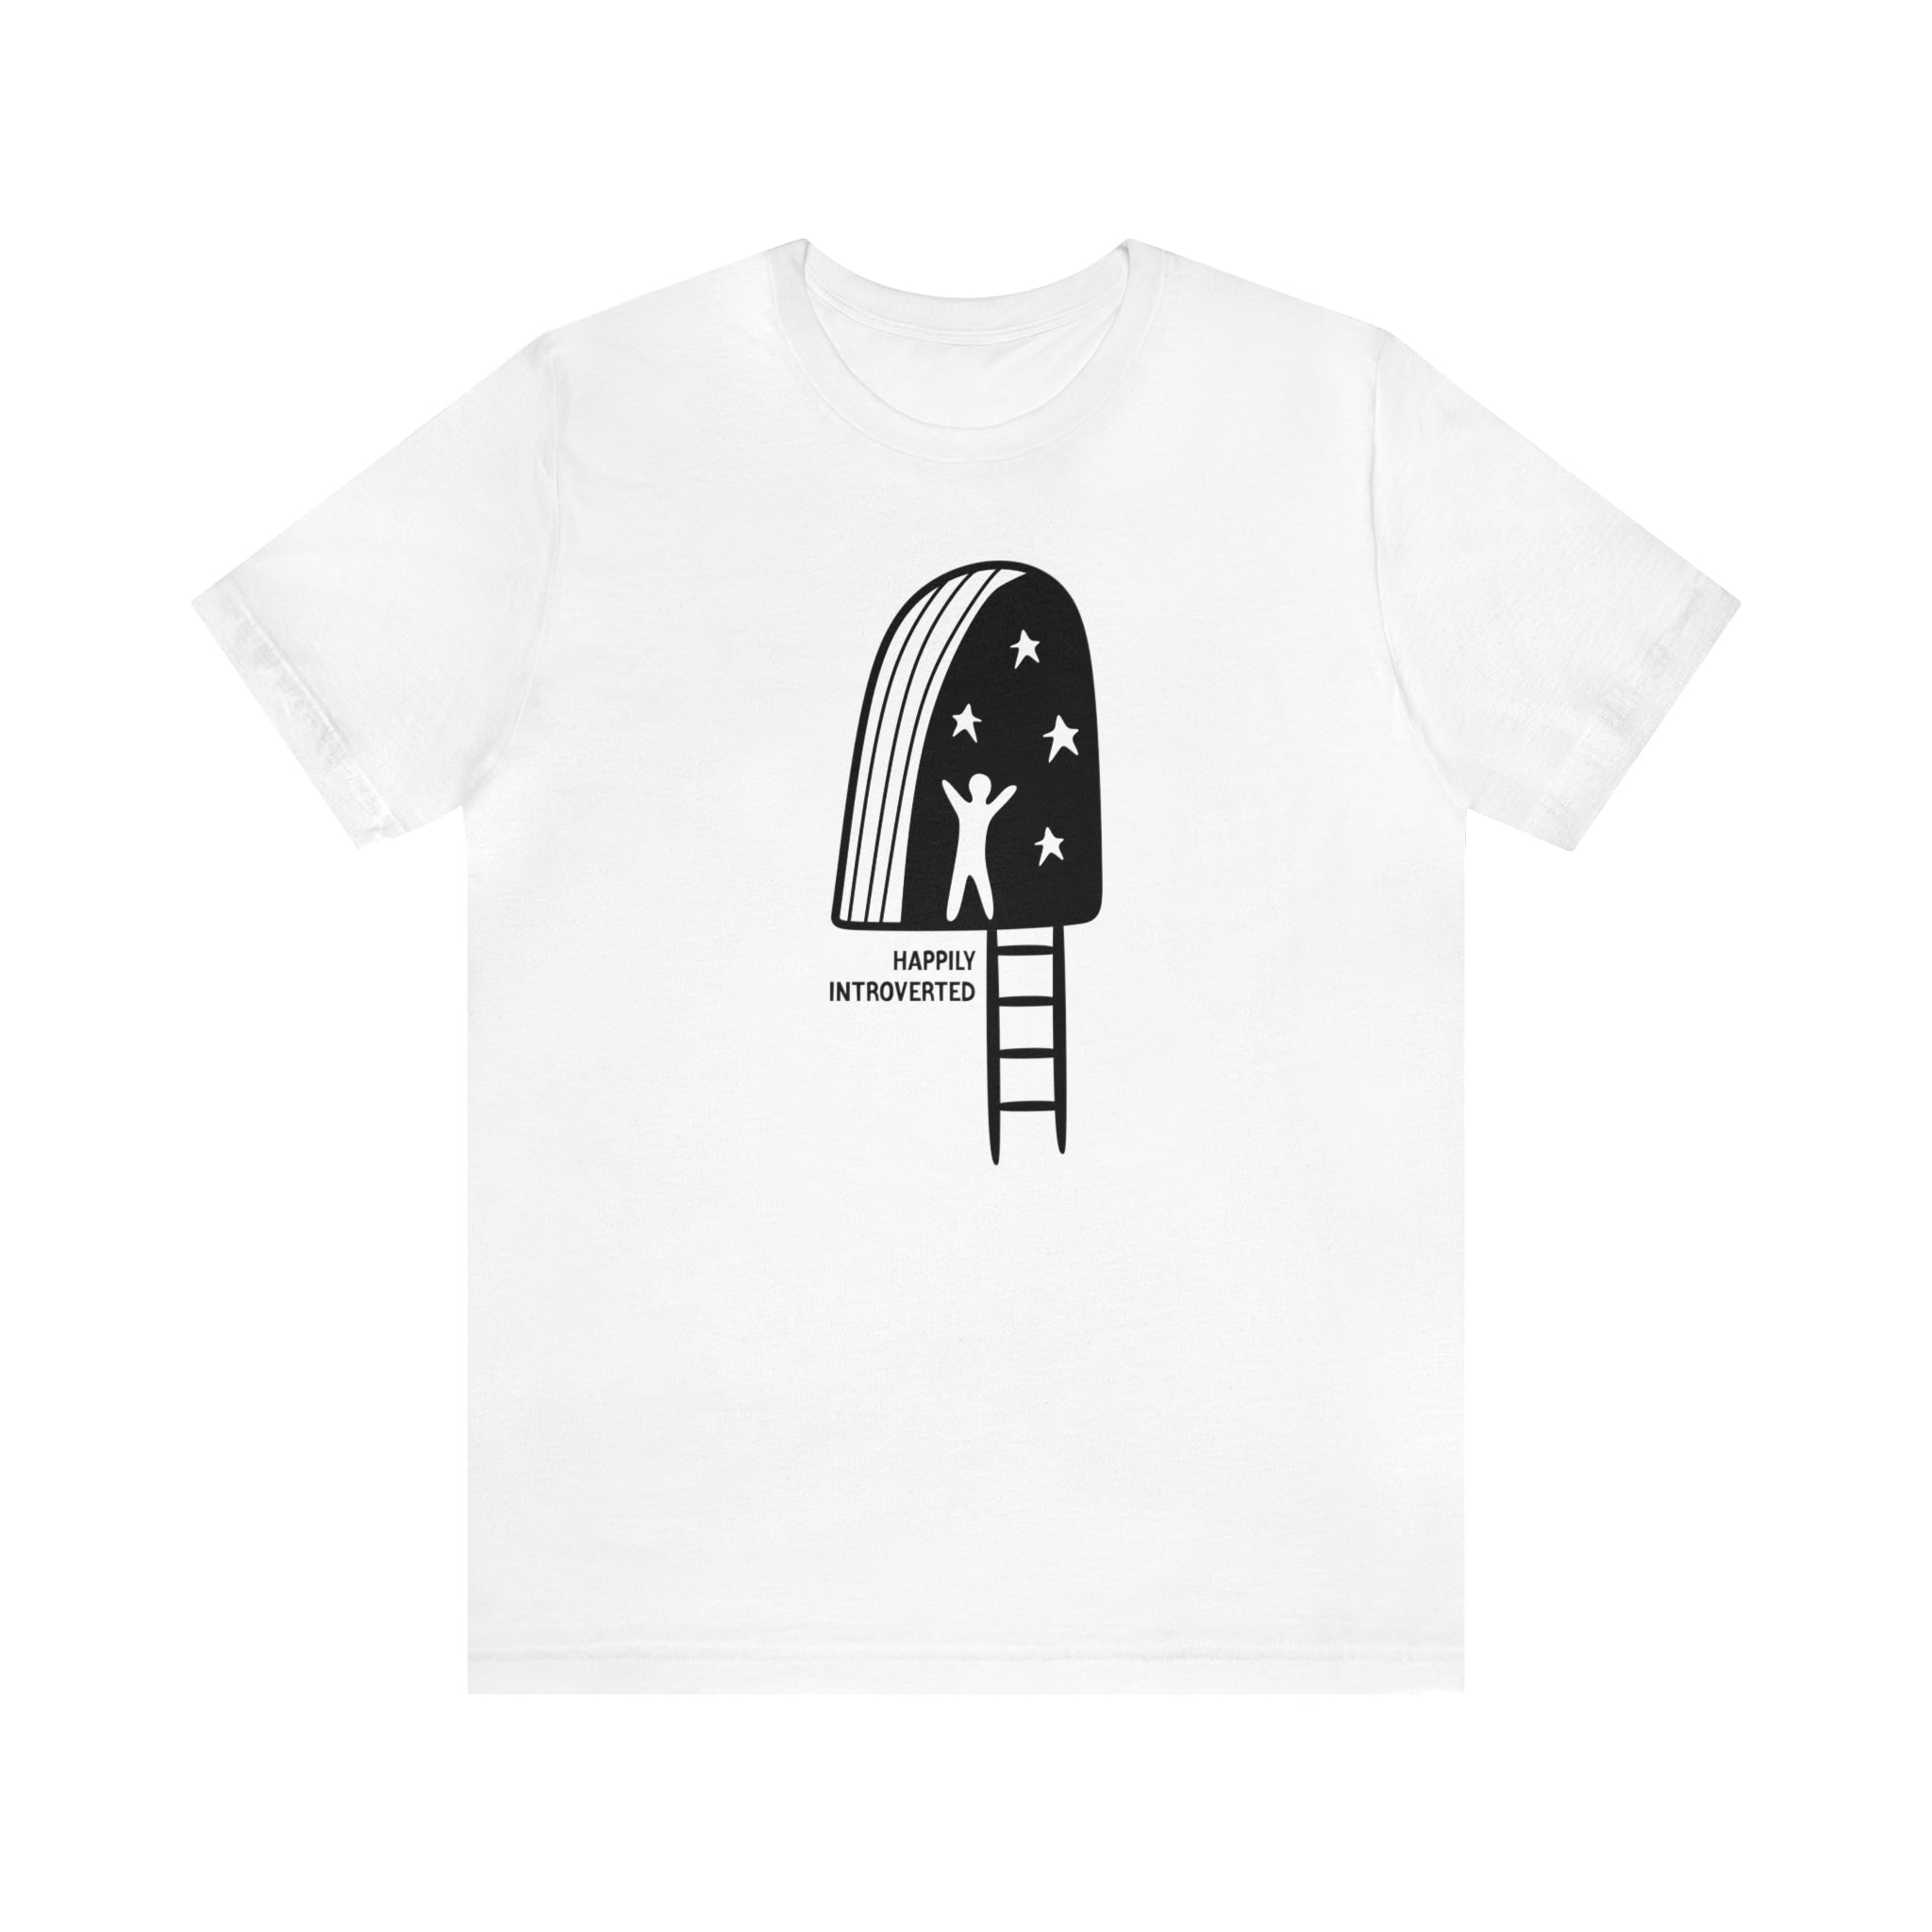 A white Happily Introverted T-Shirt with a black and white graphic.